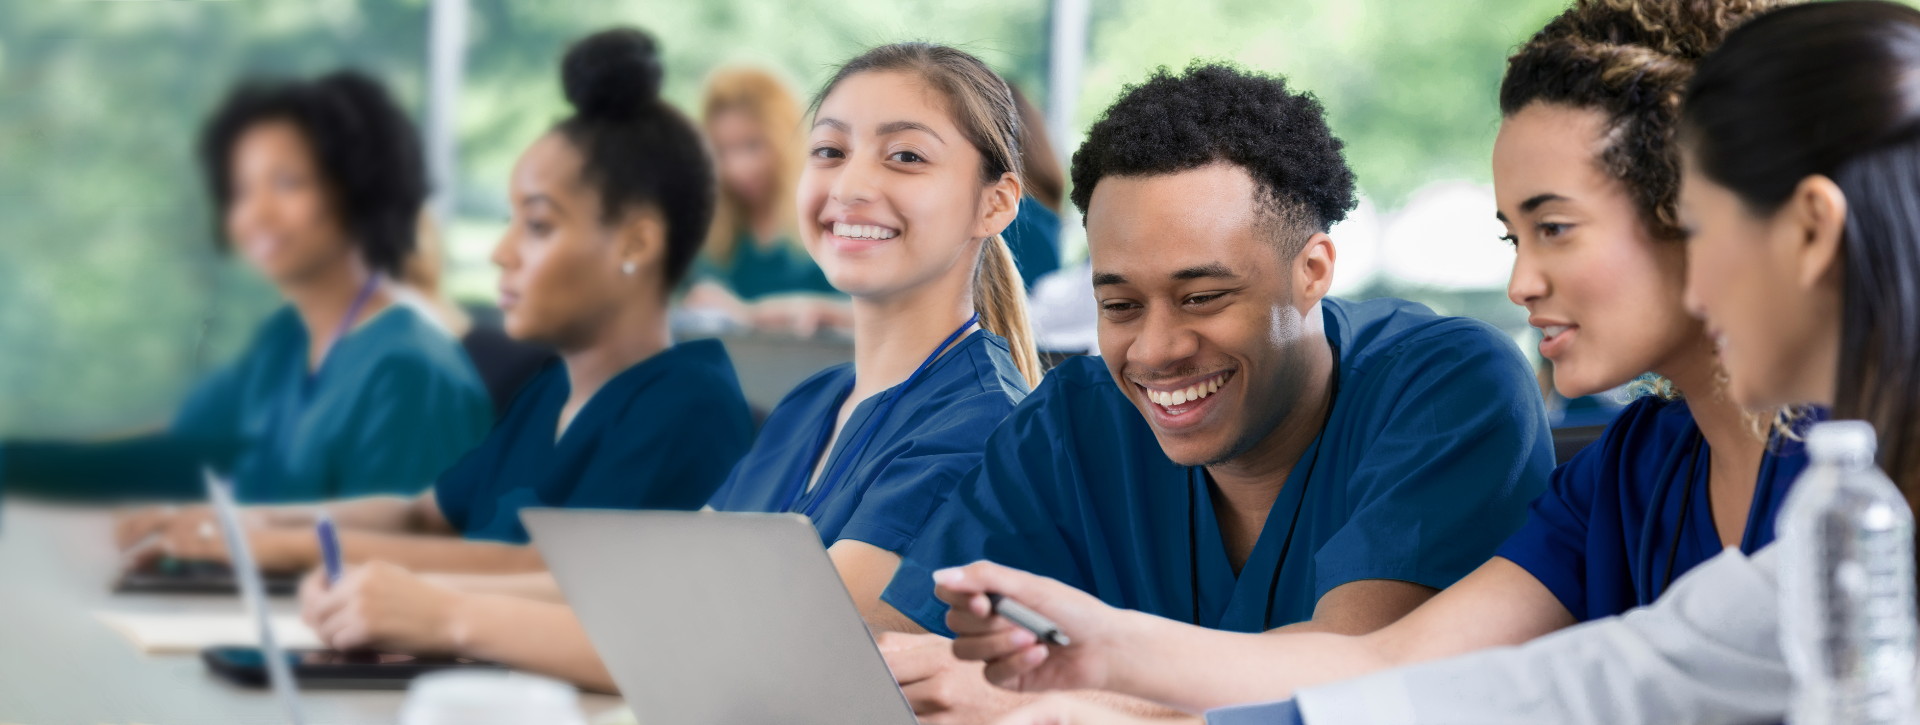 nursing students smiling in classroom